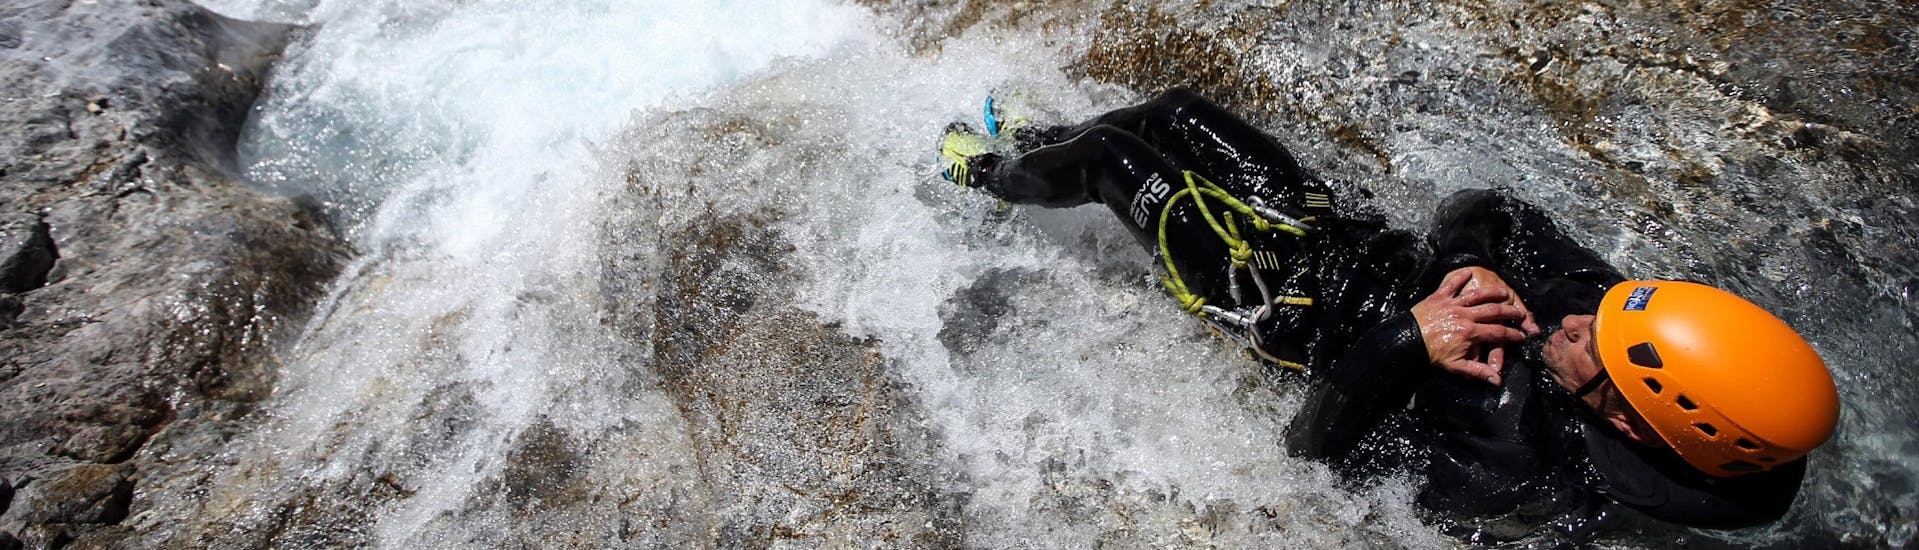 Expert Canyoning in Serre-Chevalier - Chantemerle - Briançon.